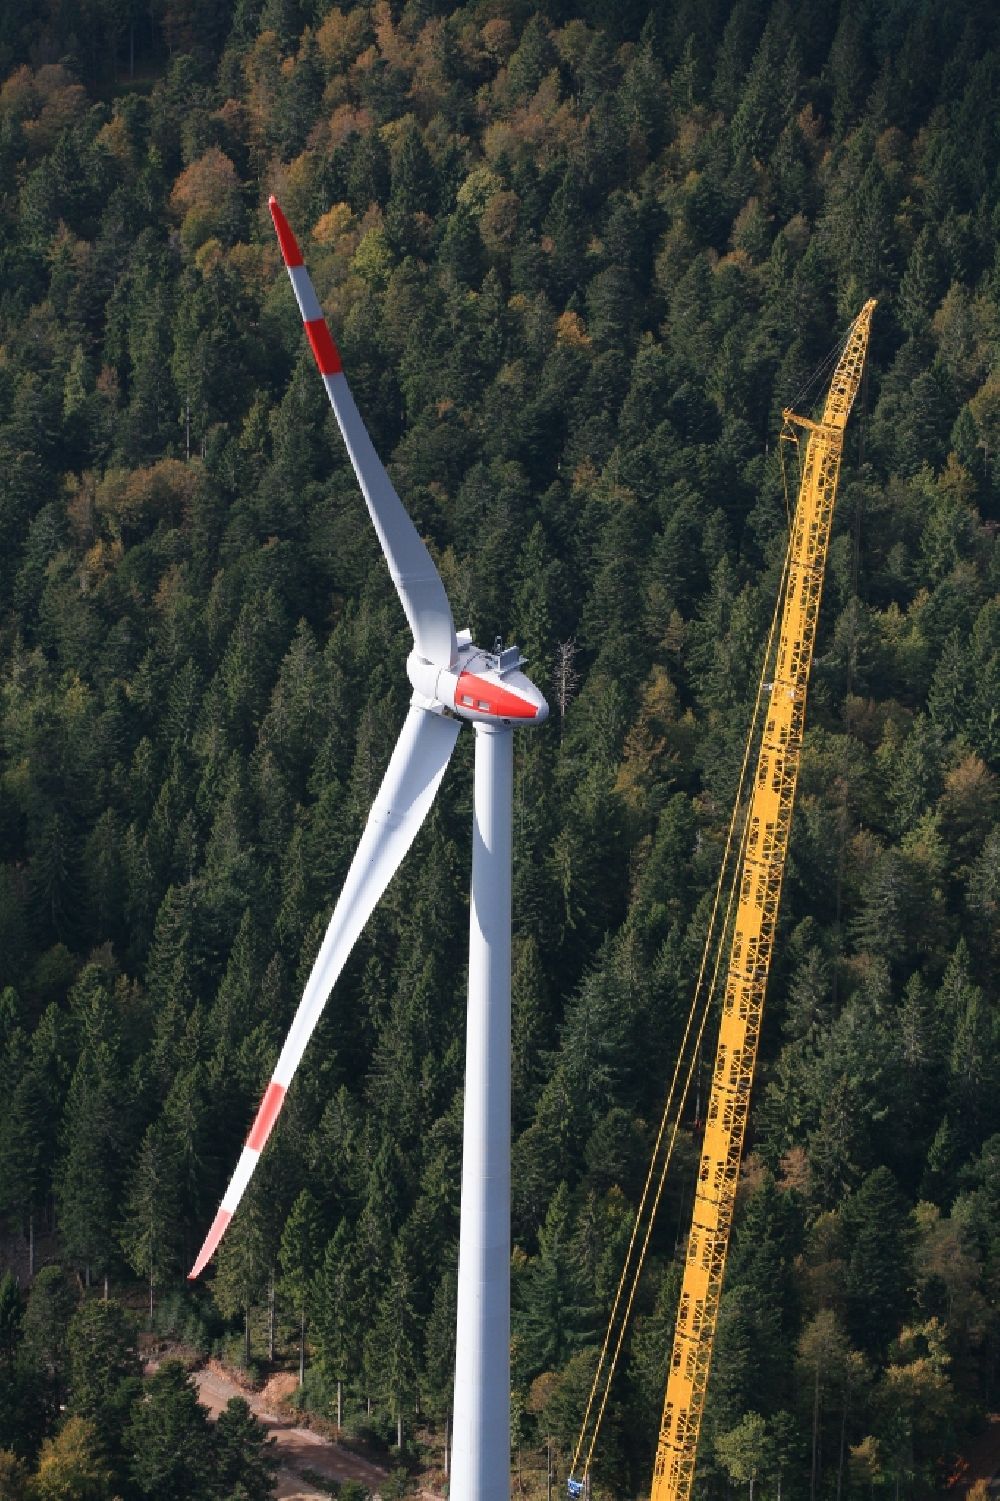 Schopfheim from the bird's eye view: On the Rohrenkopf, the local mountain of Gersbach, a district of Schopfheim in Baden-Wuerttemberg, 5 wind turbines are built. It is the first wind farm in the south of the Black Forest